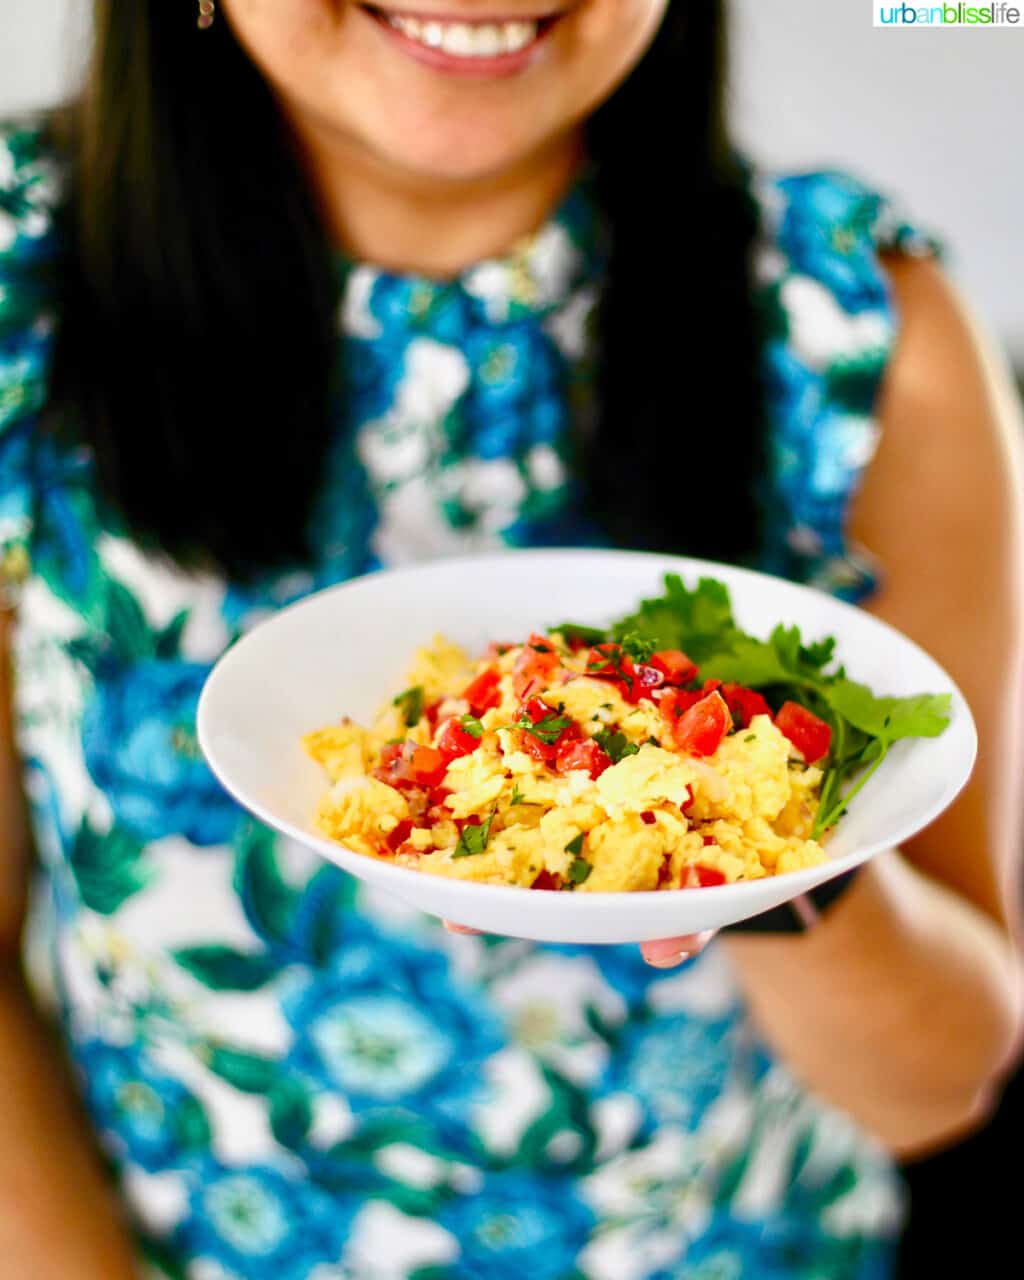 holding bowl of salsa eggs against backdrop of blue and white floral shirt